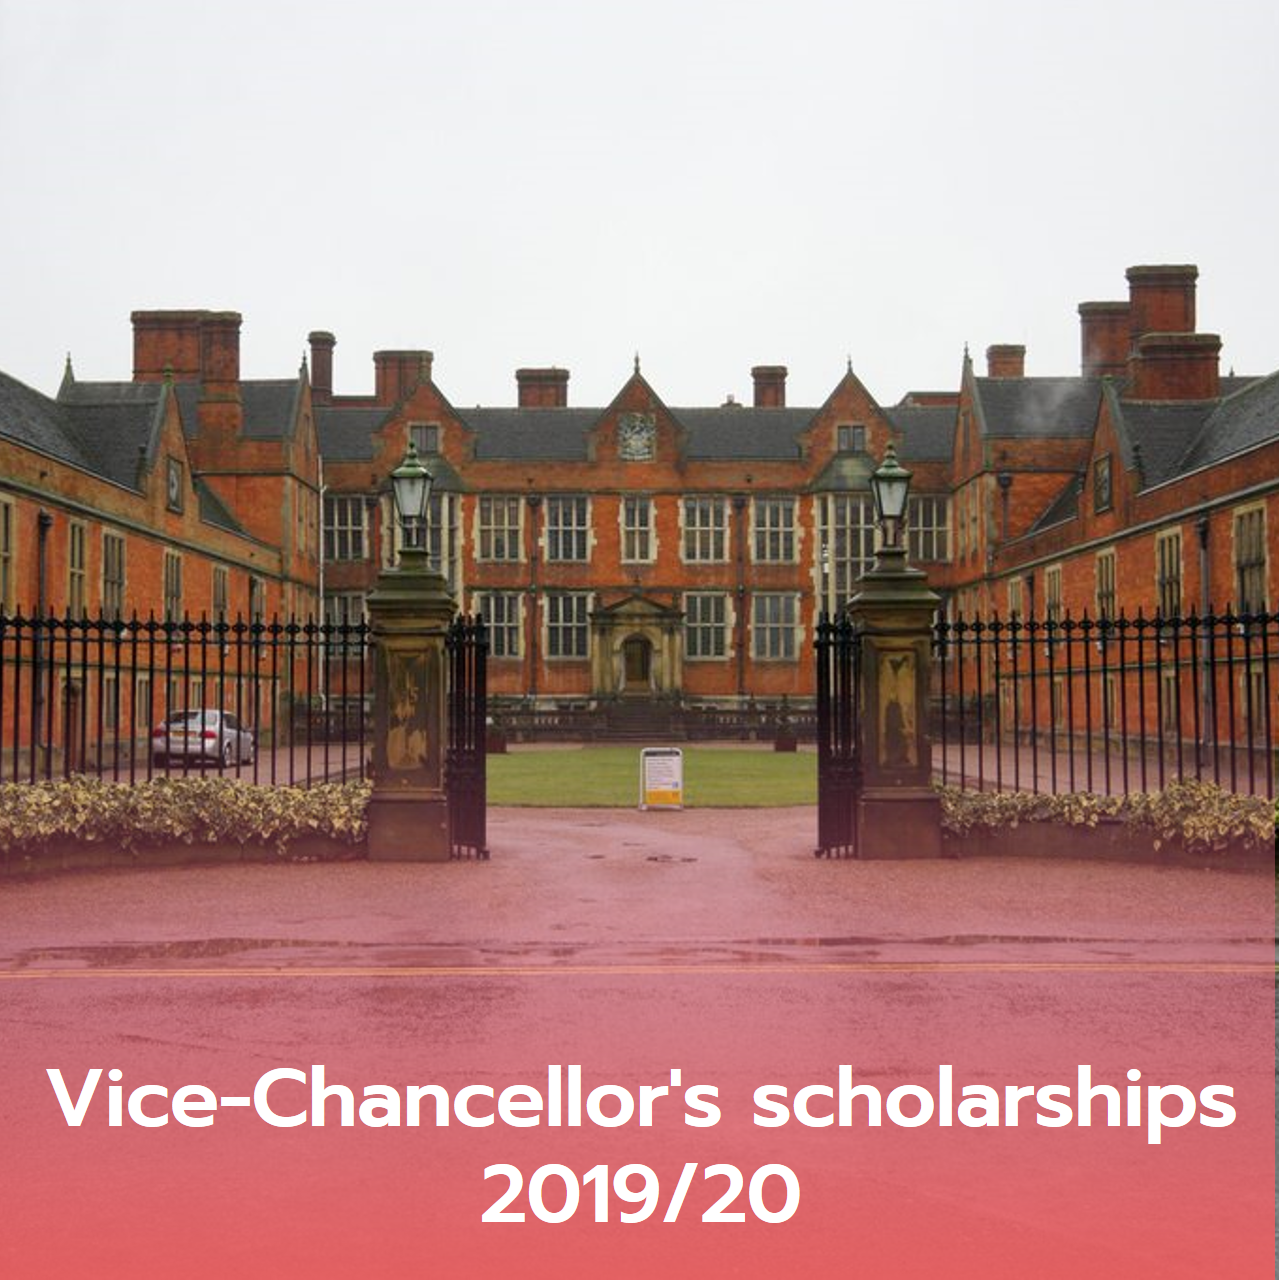  Vice-Chancellor’s scholarships 2019/20